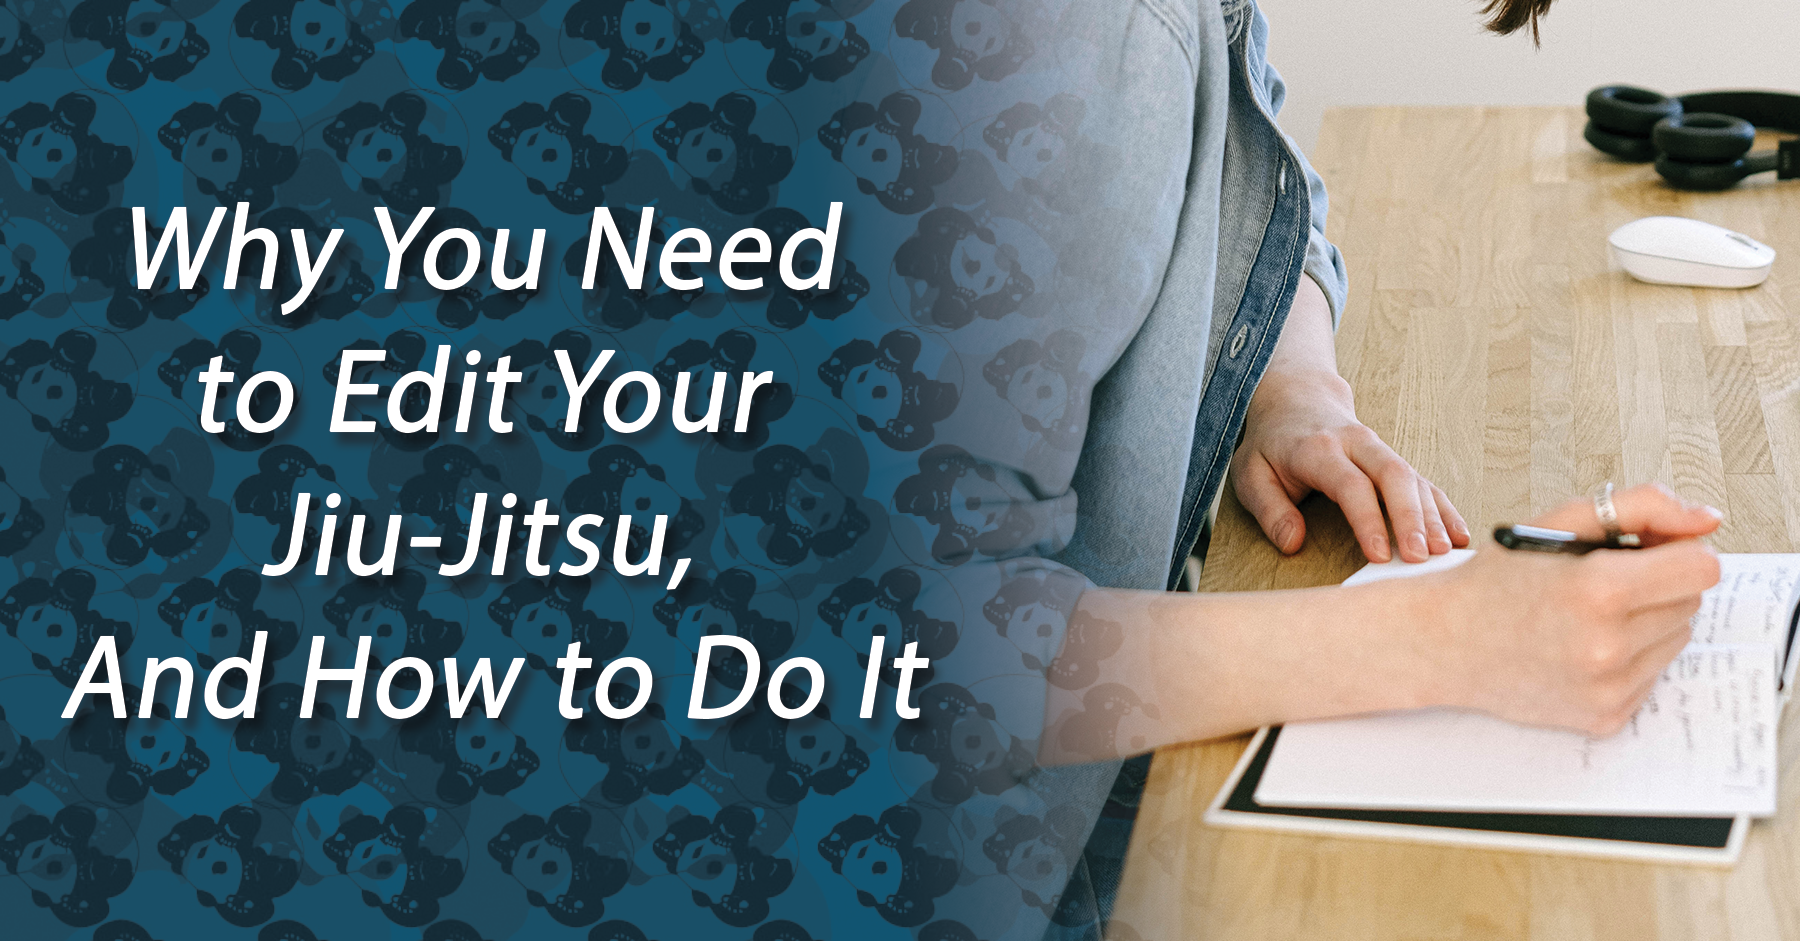 Why You Need to Edit Your Jiu-Jitsu, And How to Do It